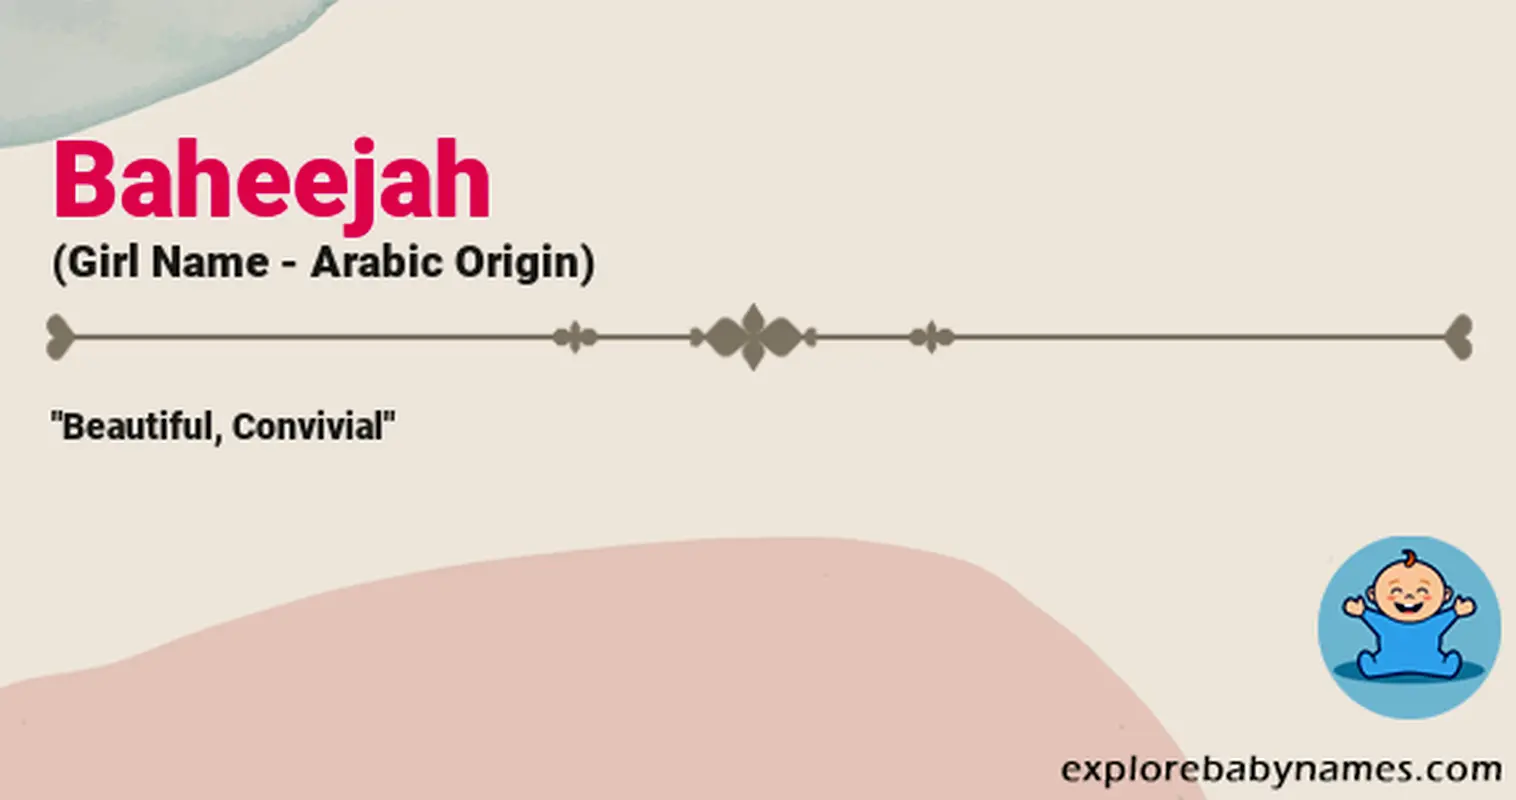 Meaning of Baheejah